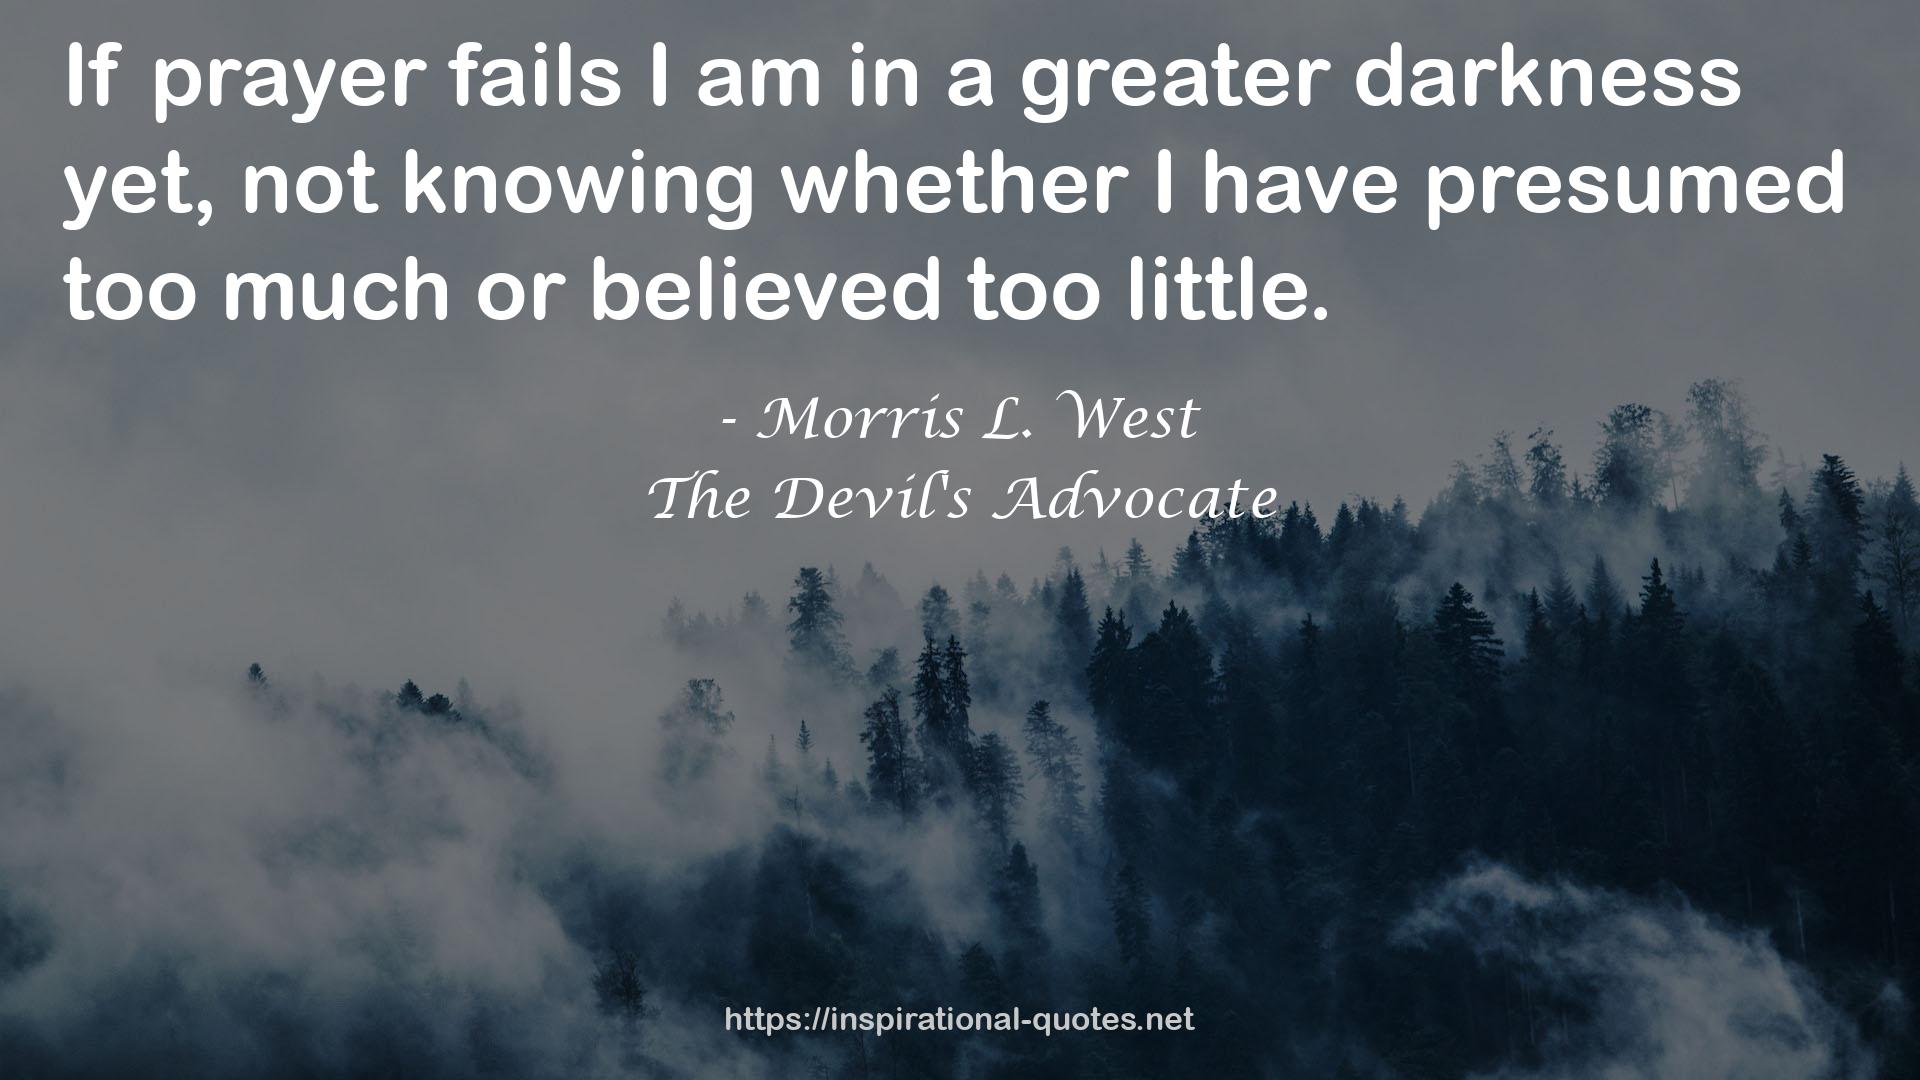 a greater darkness  QUOTES